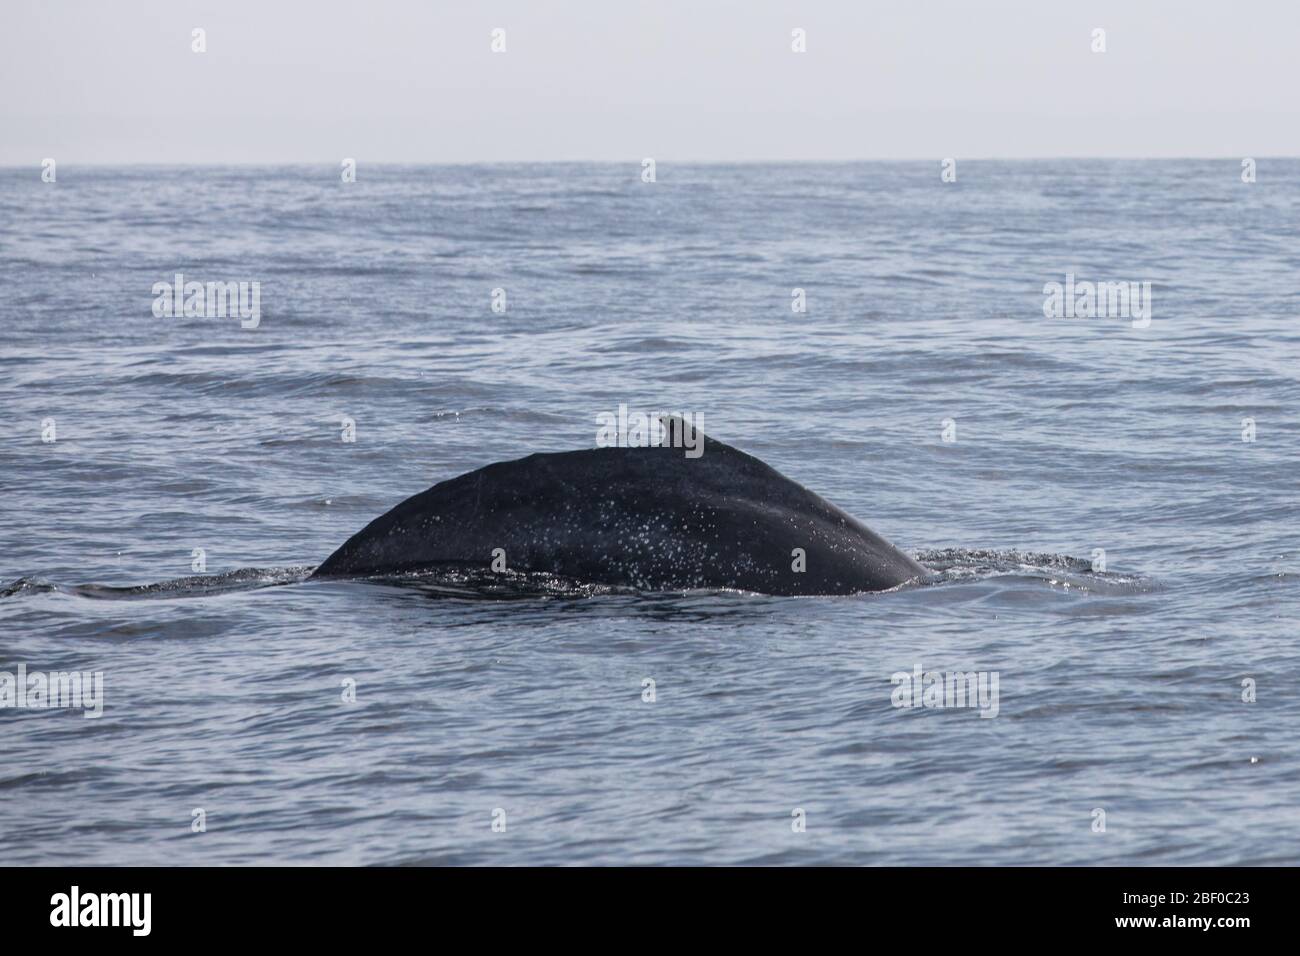 Humpback whale, Megaptera novaeangliae, are individually recognizable by the black and white patterns on the underside of their flukes, South Africa Stock Photo